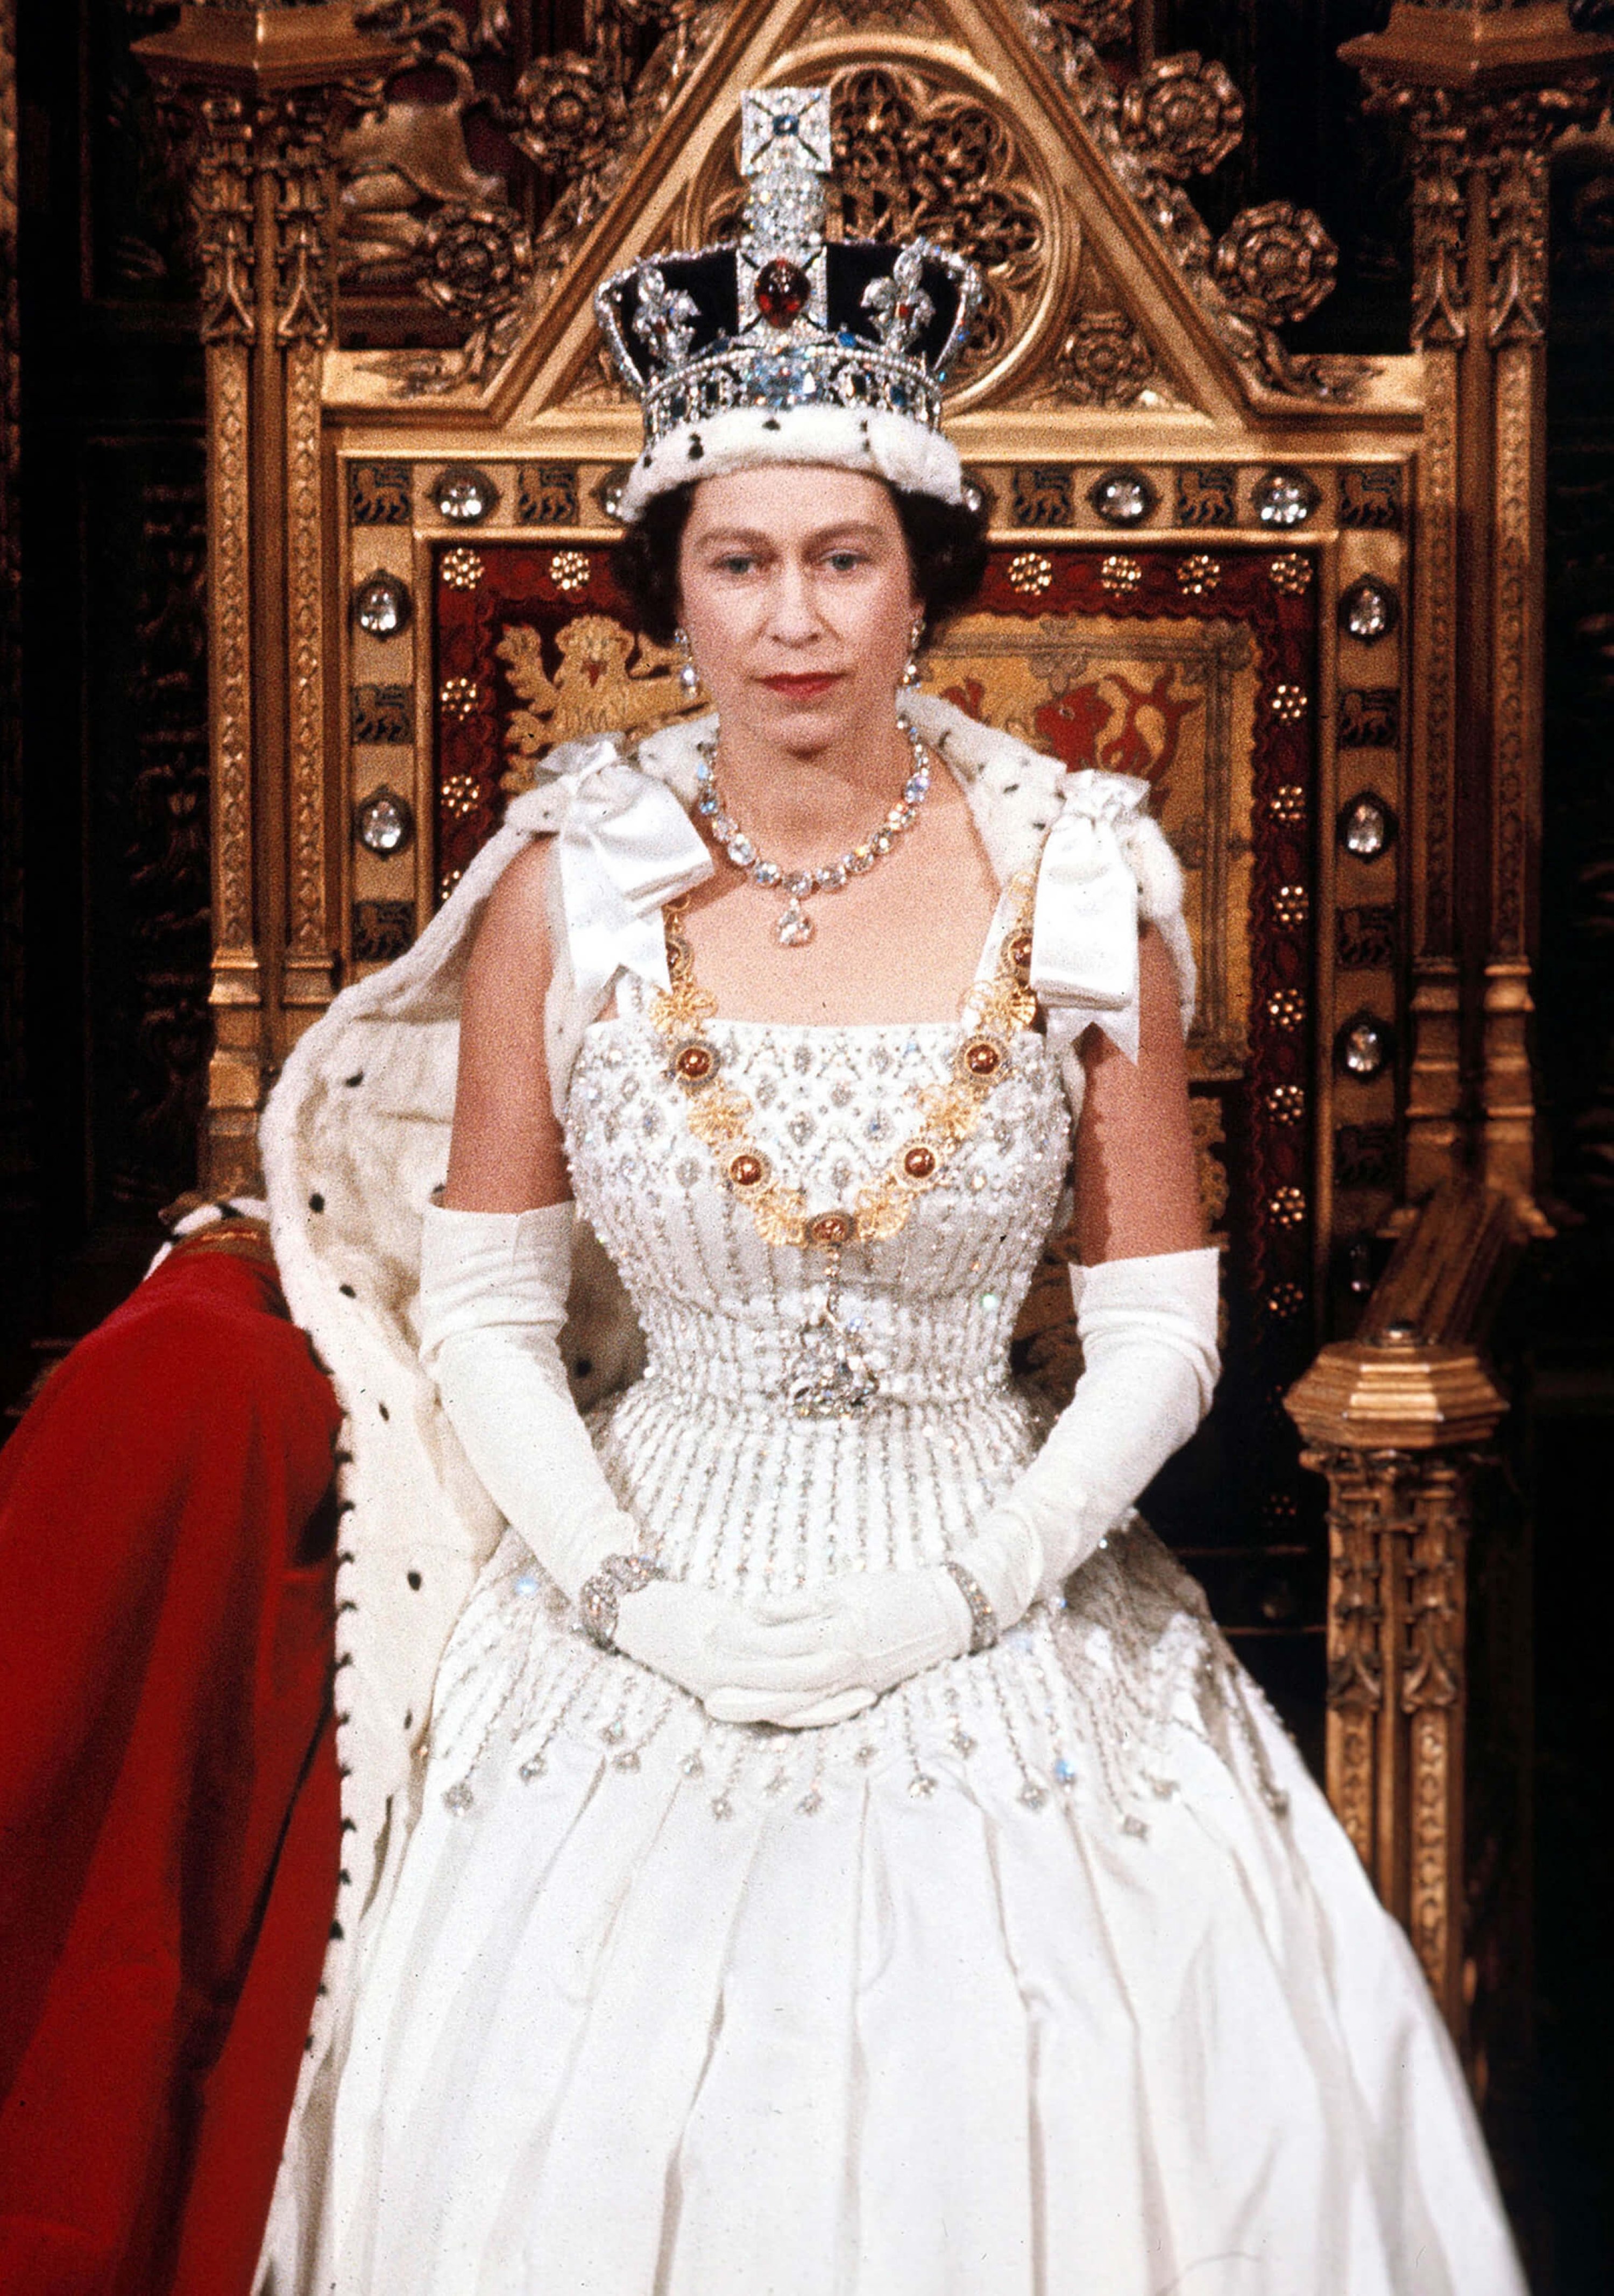 90 Images Young Queen Elizabeth For FREE - MyWeb